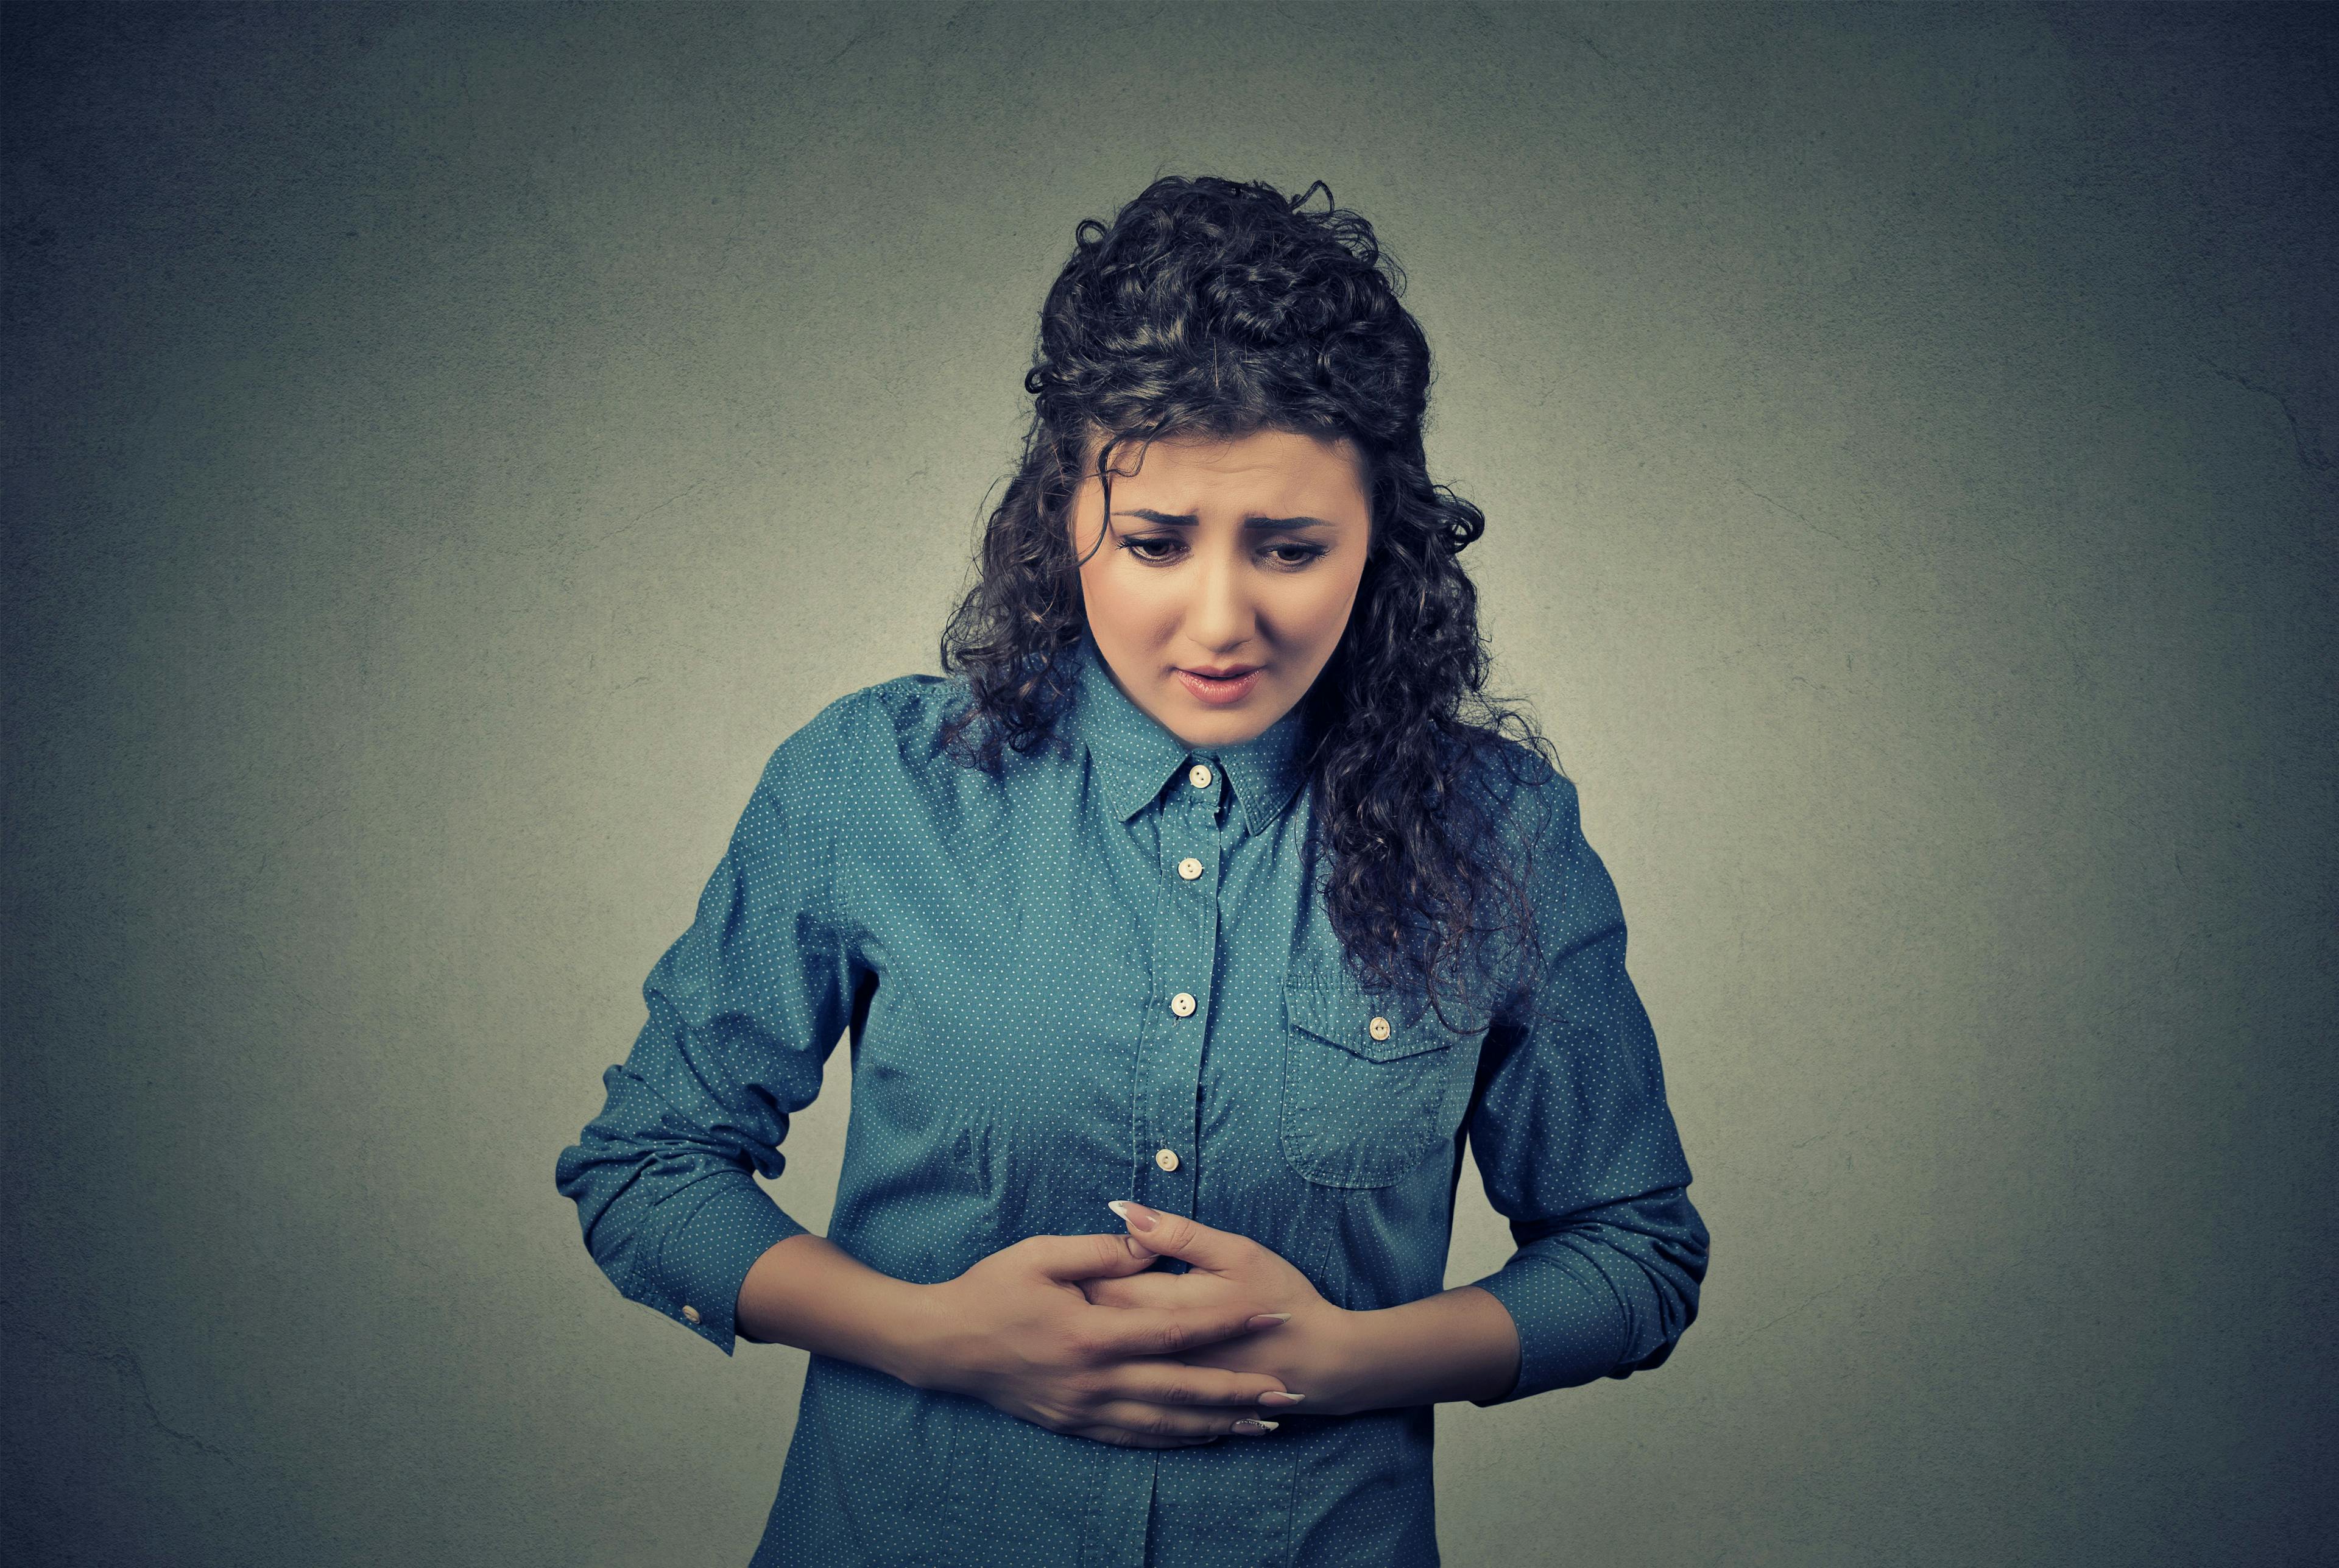 Meaningful Health Care Visits Needed for IBS, Chronic Idiopathic Constipation